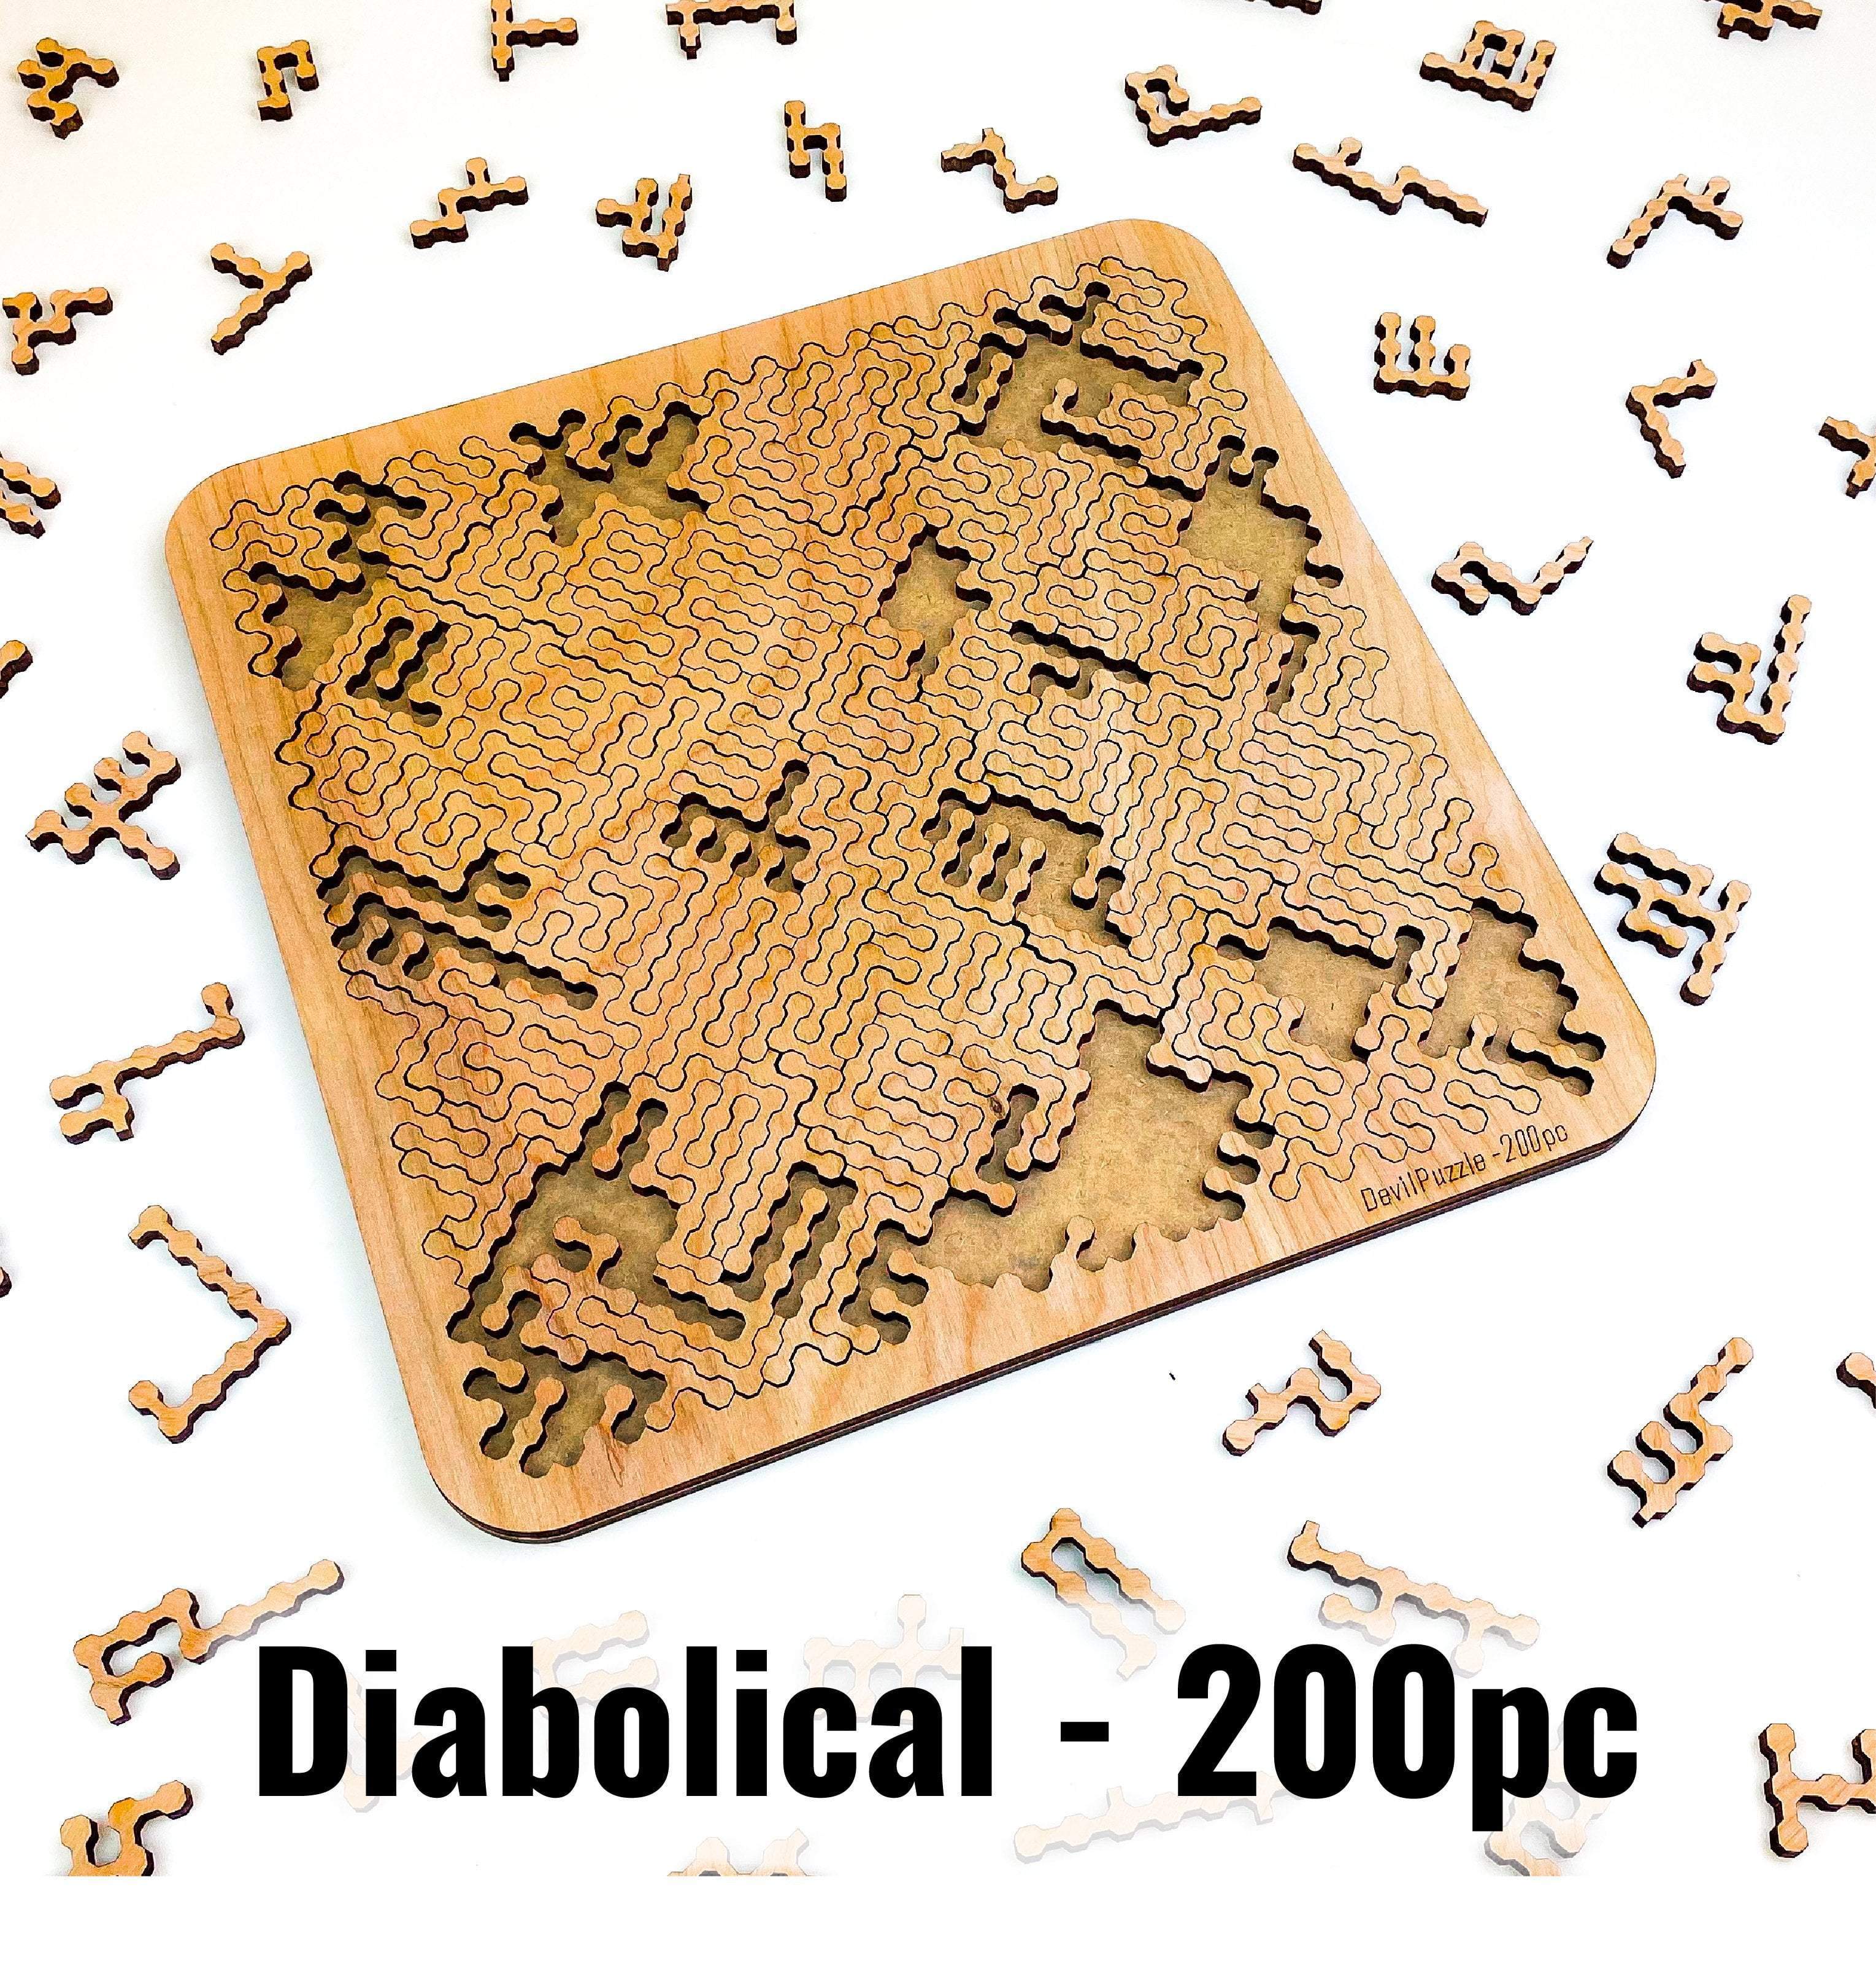 Torched Products Puzzle Diabolical (200 pieces) Mind Bending Octagonal Fractal Puzzle